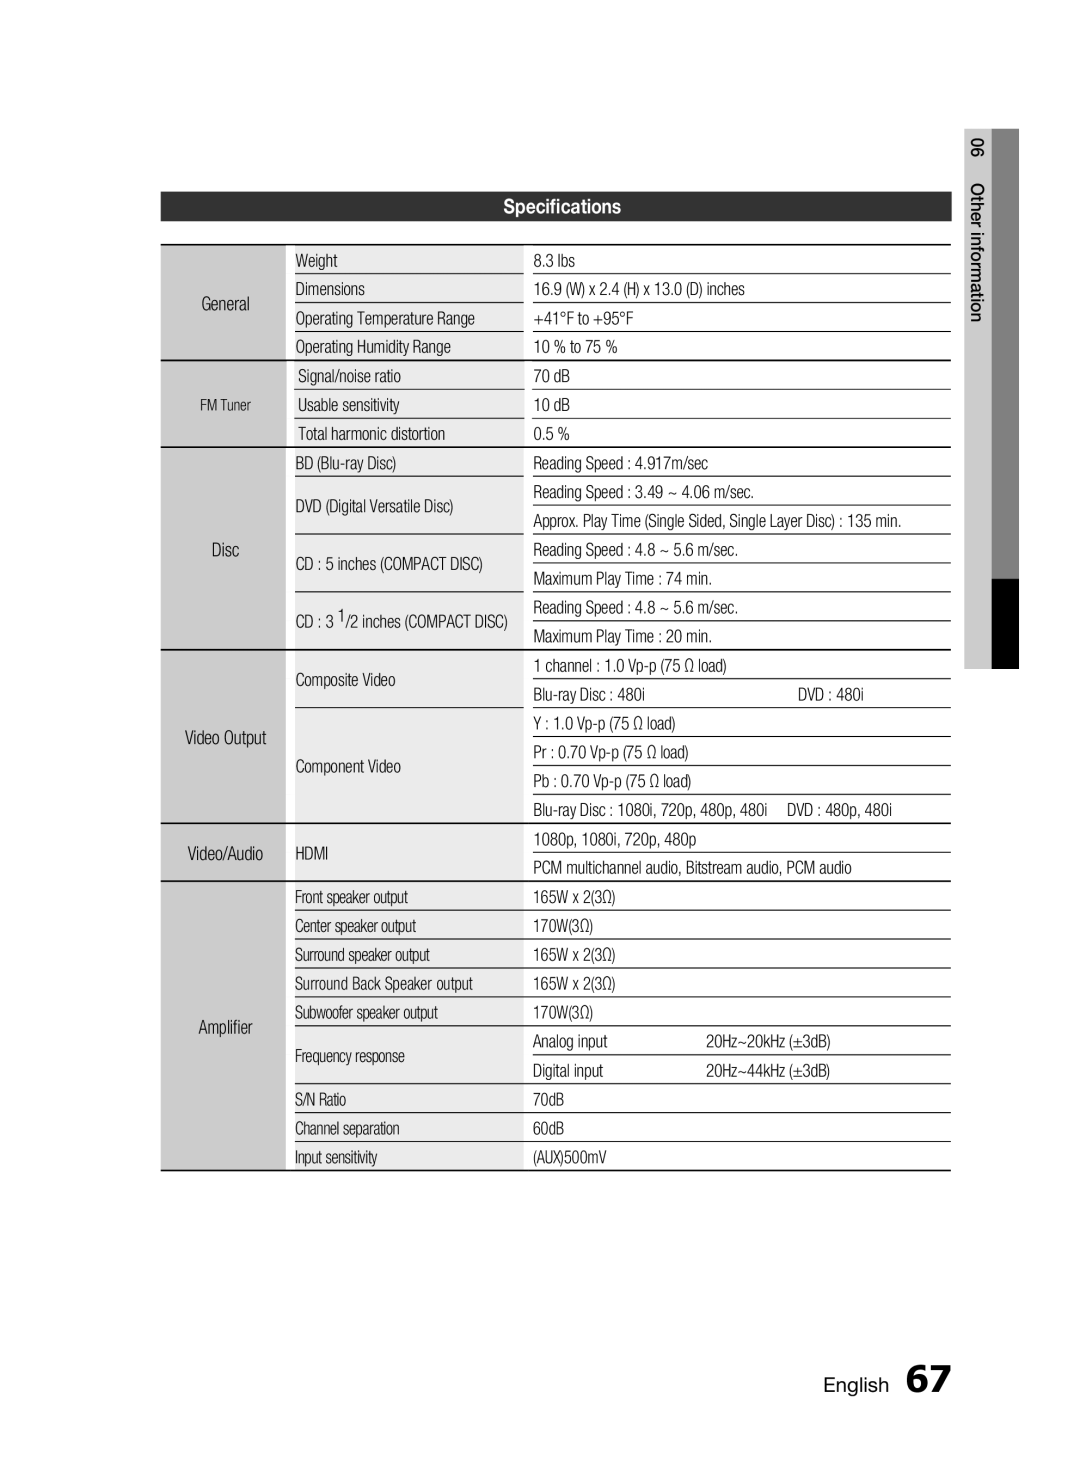 Samsung HT-C6730W, AH68-02290S user manual Speciﬁcations, English 